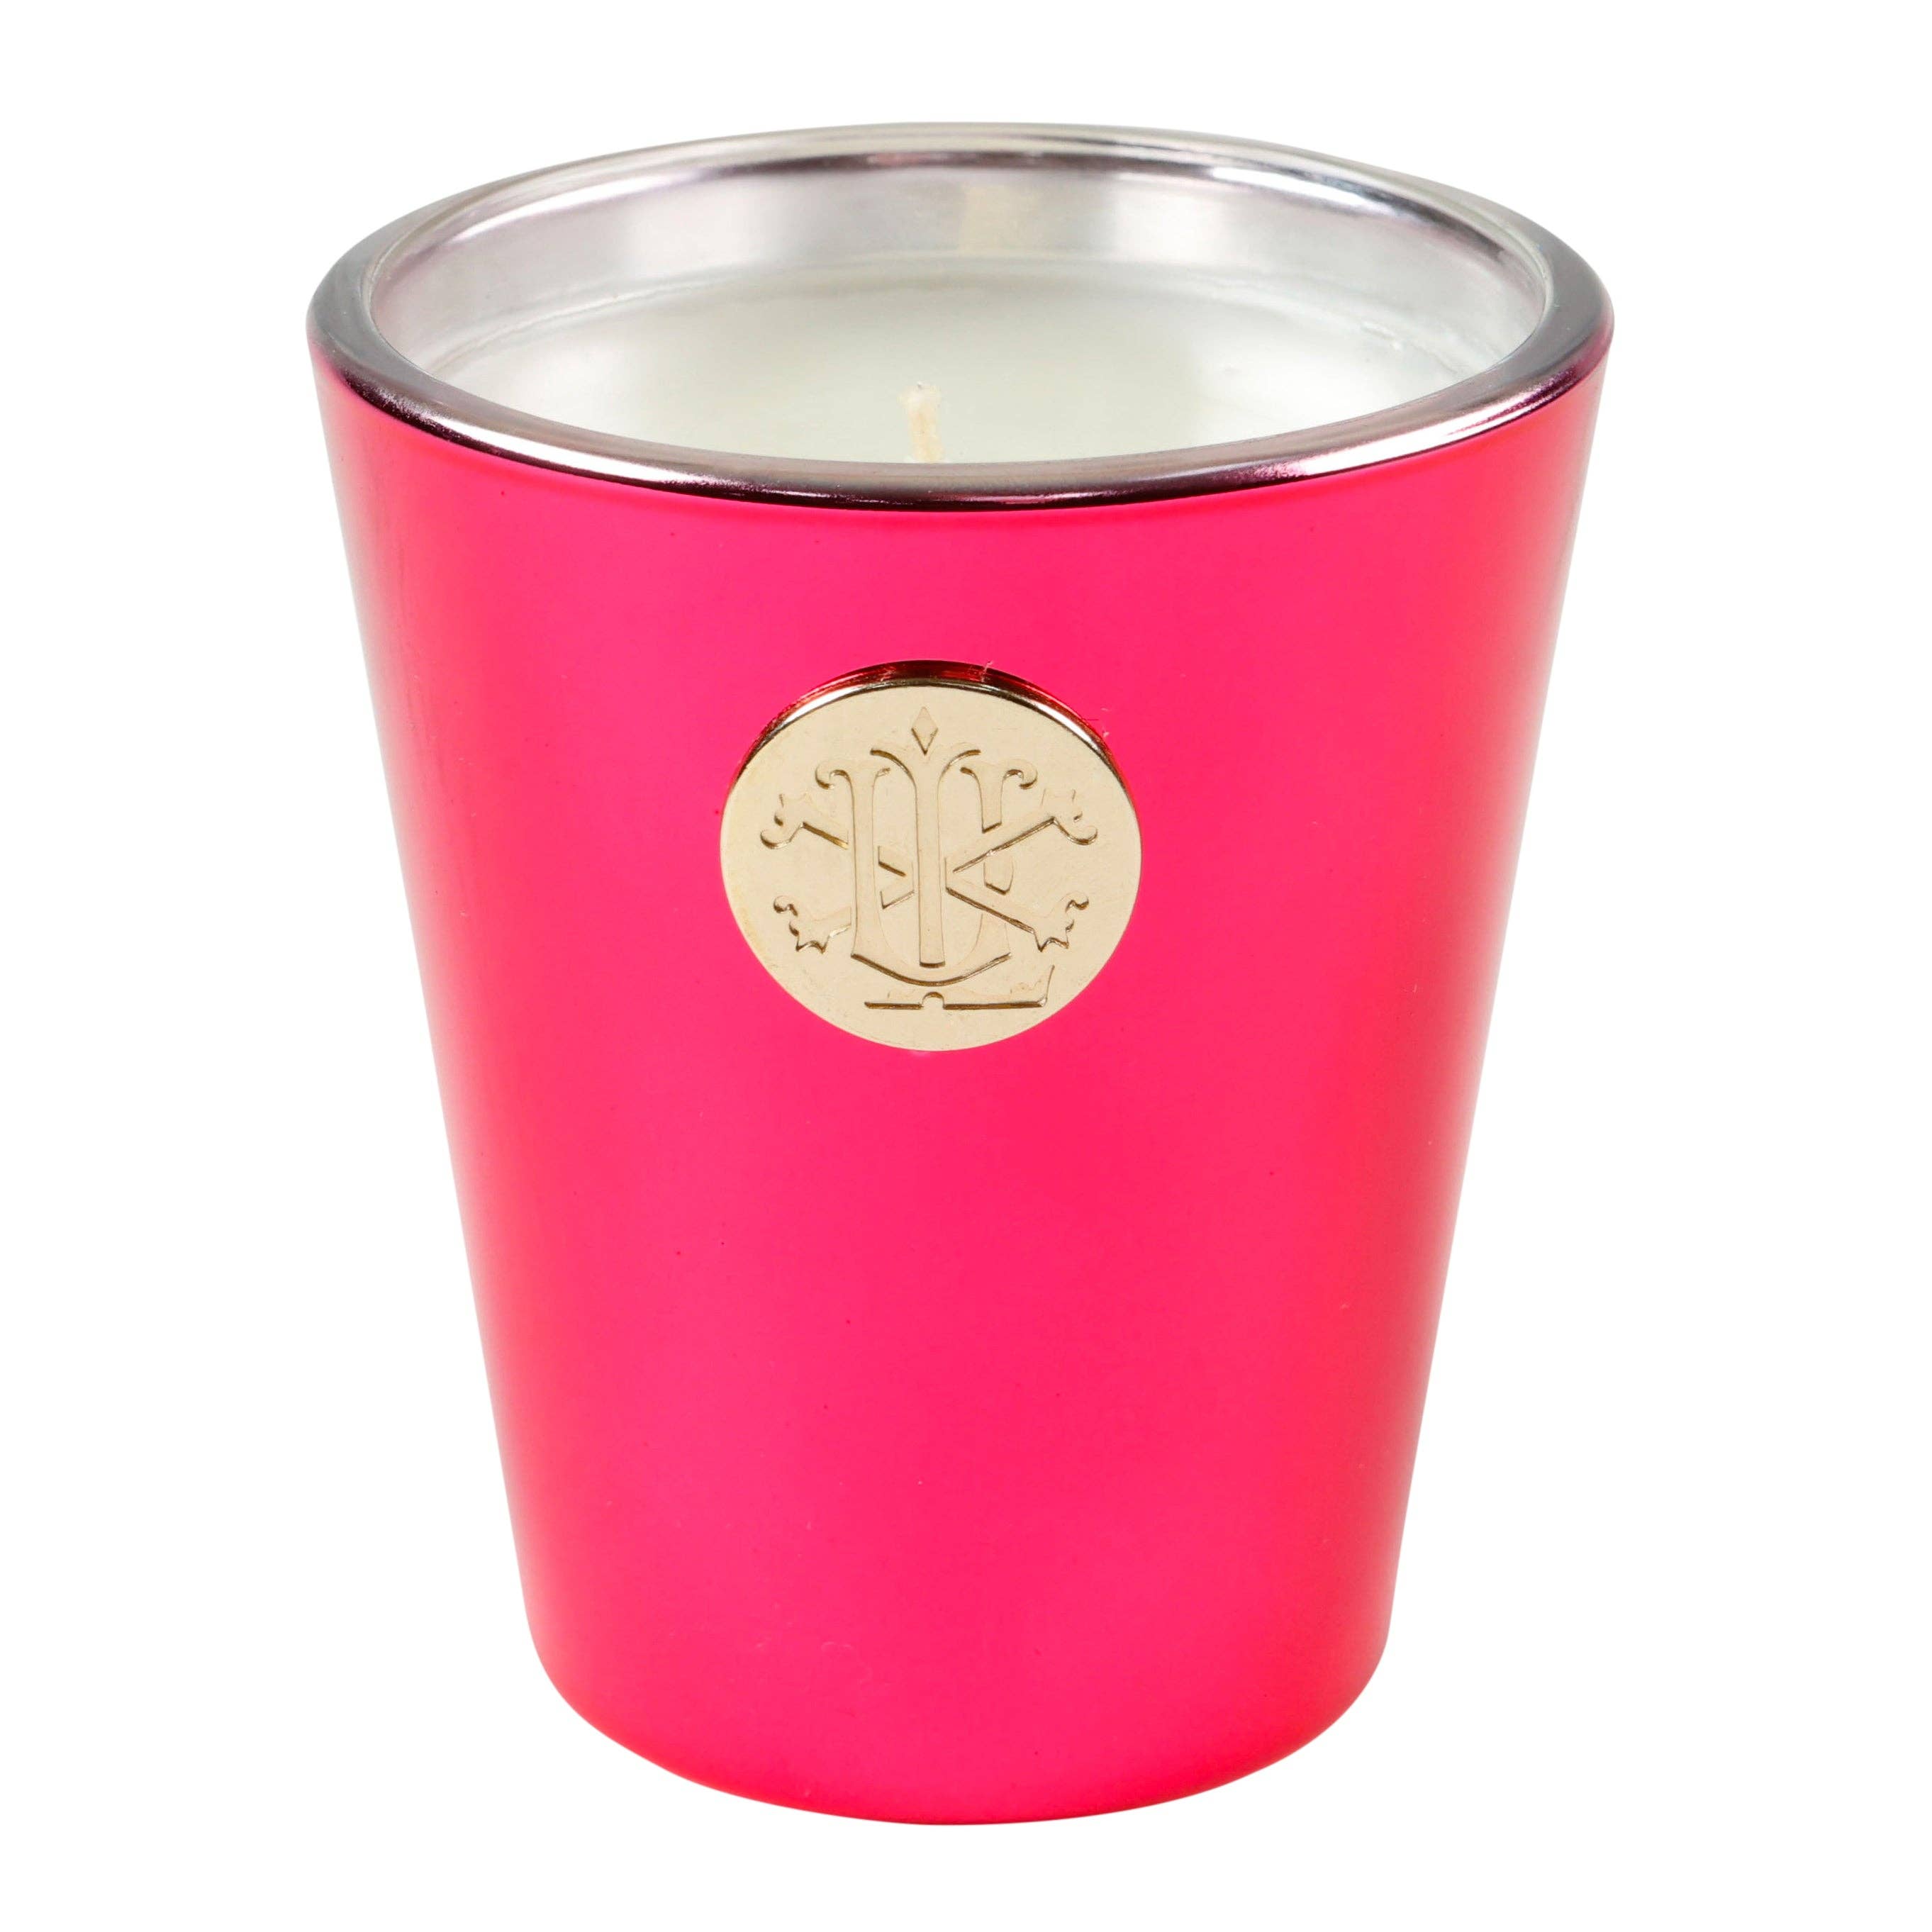 LUX FRAGRANCES - ROSE BOX CANDLE